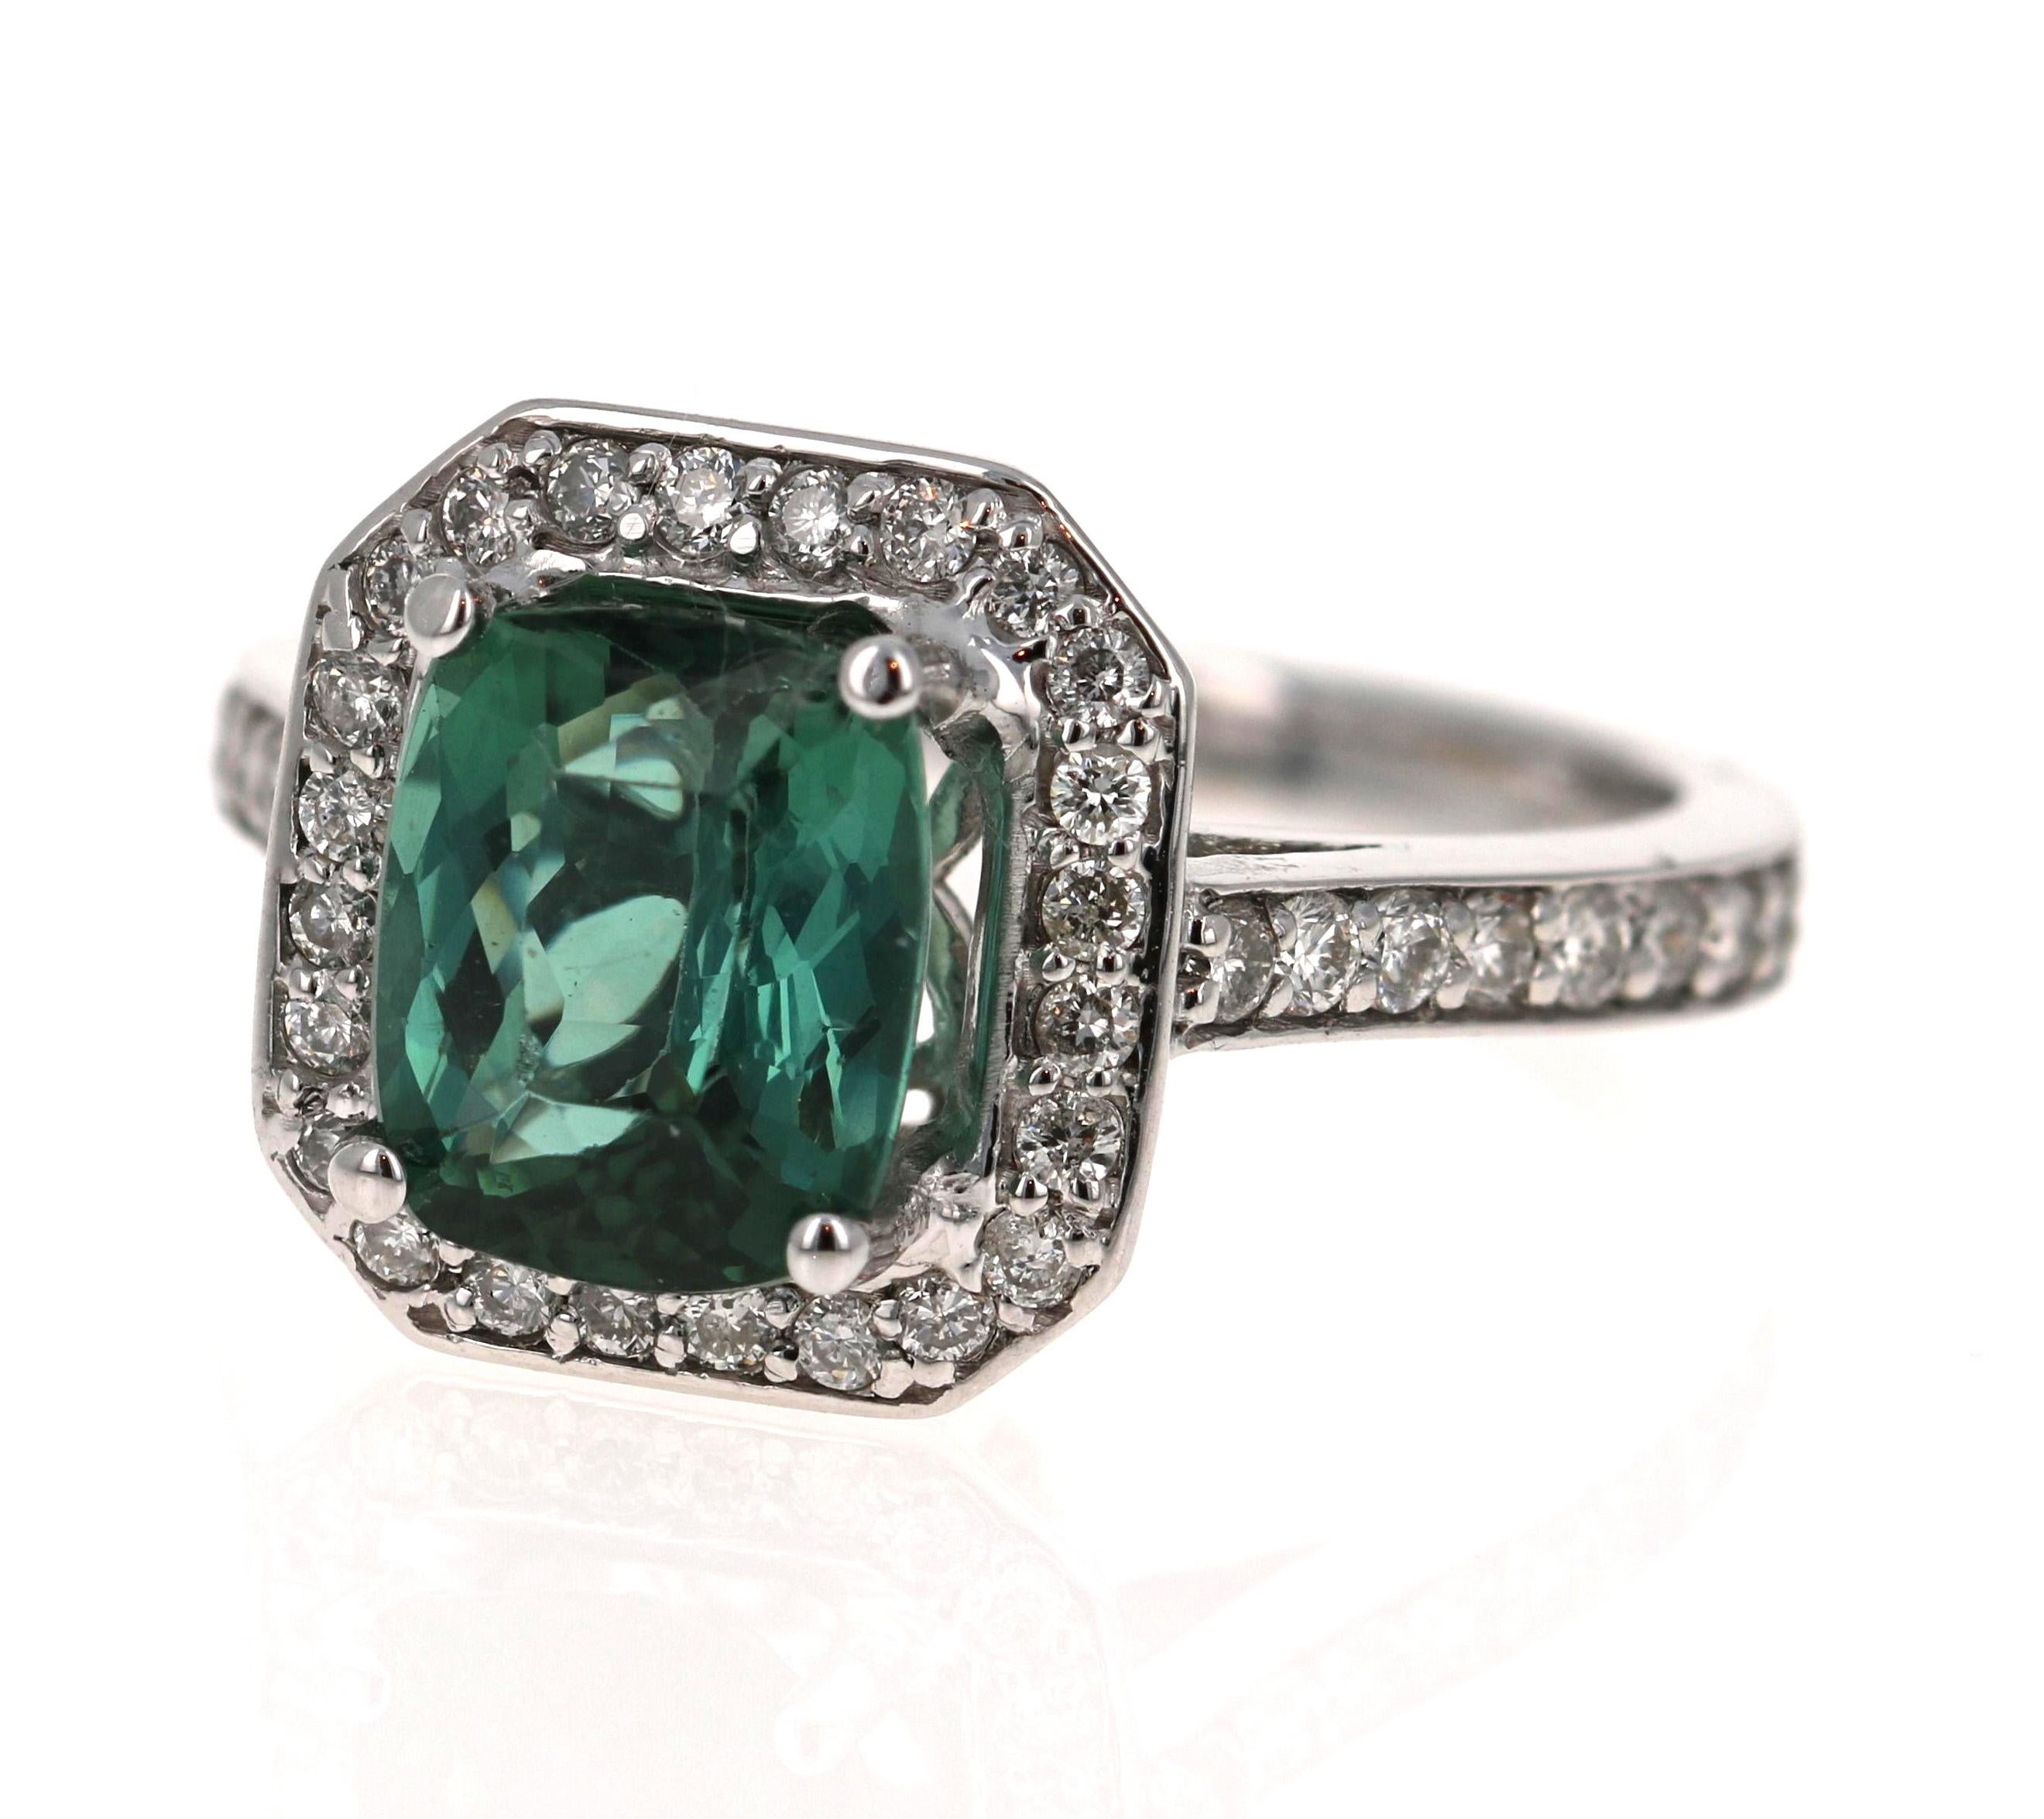 This gorgeous ring has a beautiful Cushion Cut Green Tourmaline weighing 2.55 Carats and is surrounded by 77 Round Cut Diamonds weighing 0.67 Carats (Clariy: SI, Color: F).   The total Carat weight is 3.22 Carats.  

It is set in 14K White Gold and